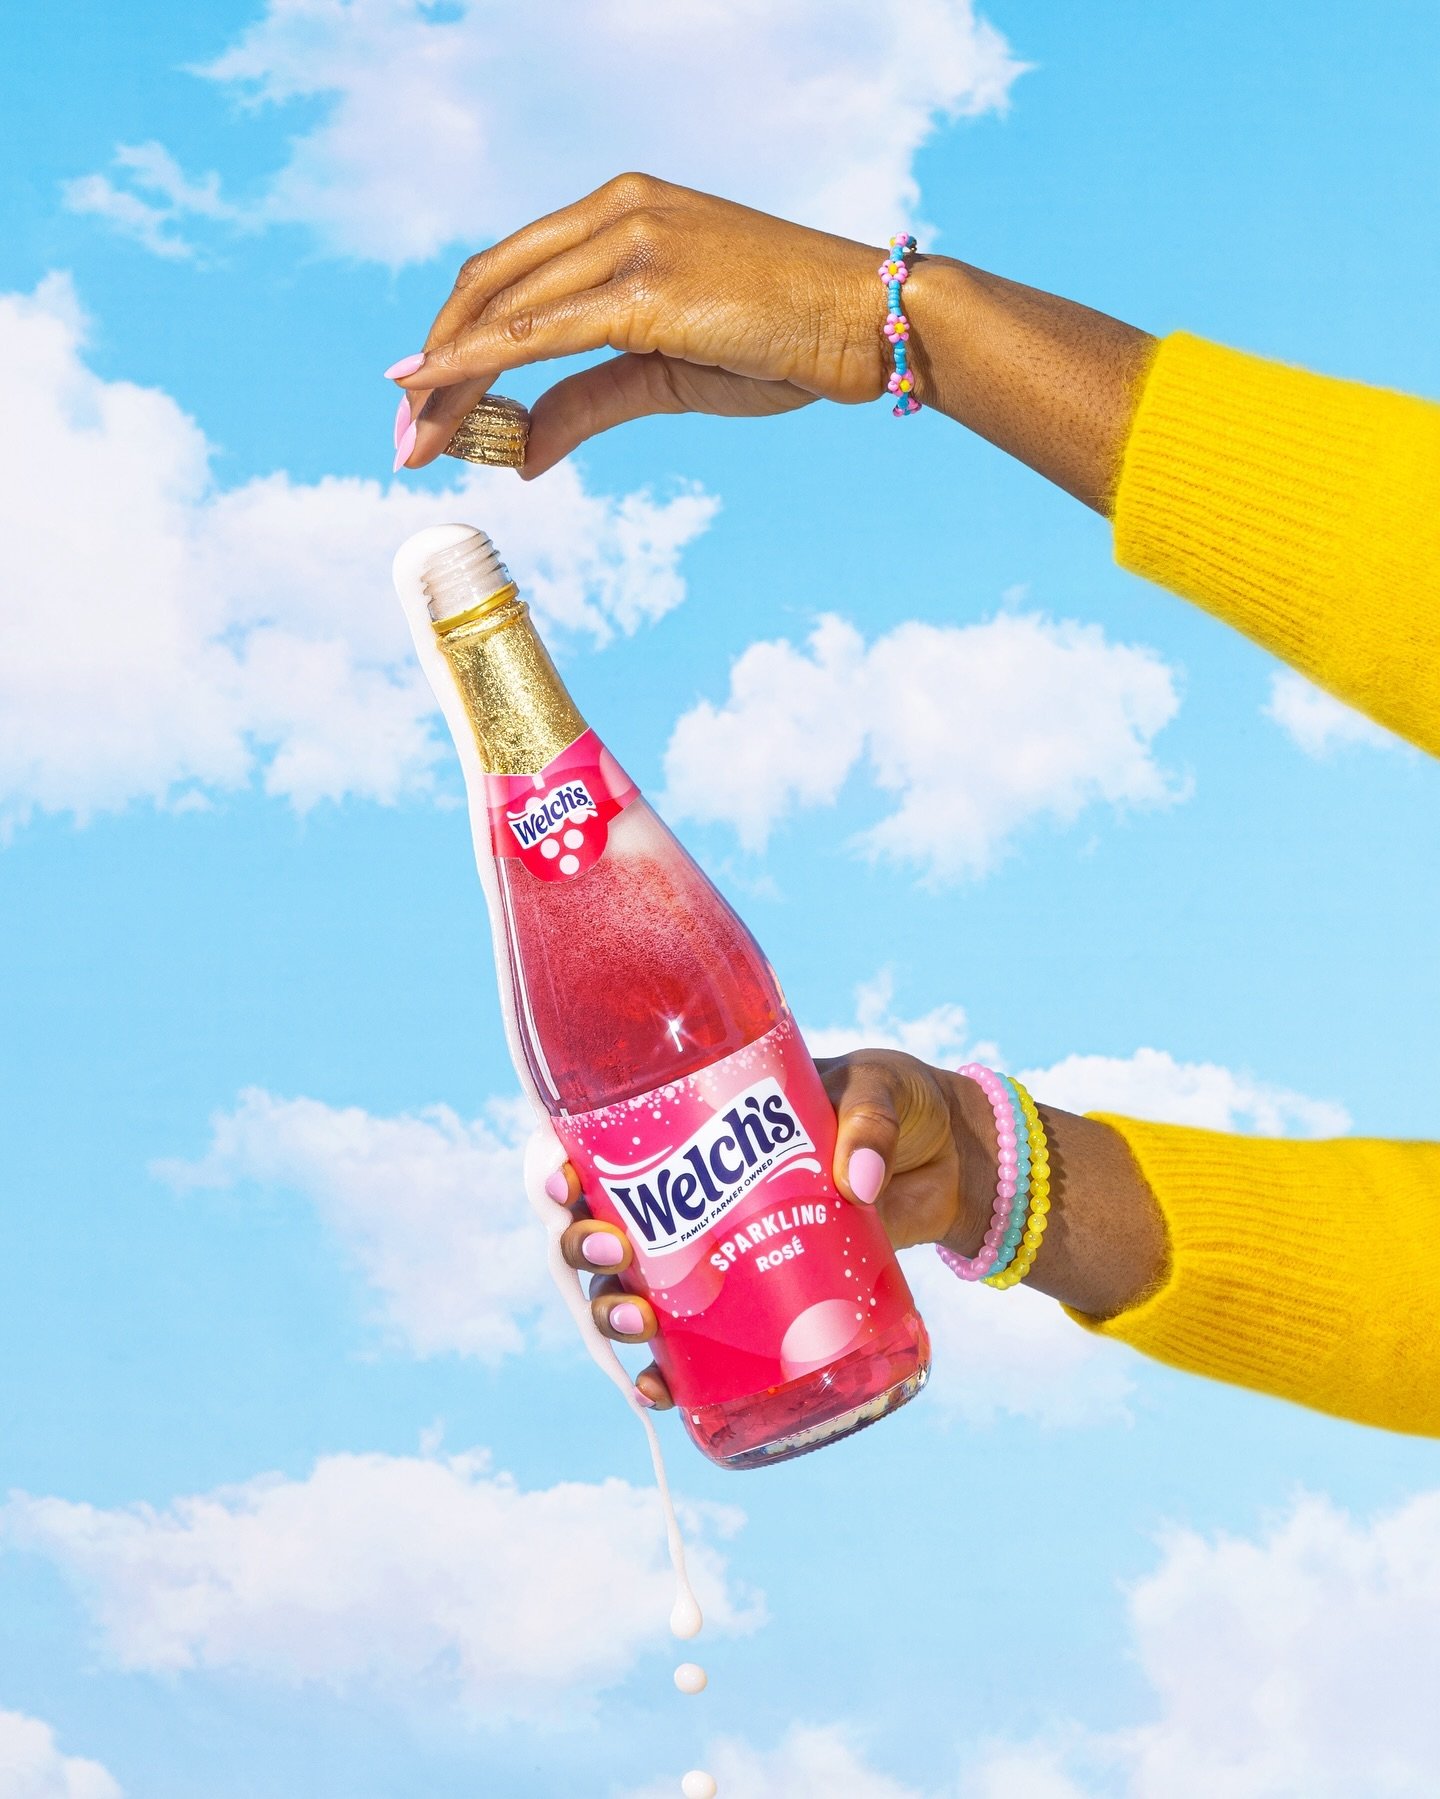 Popping bottles 🍾☀️🩷 photo shot for @welchs 

Talent: @theonlyblessidyouknow 
Ad Agency: @fitzco 

Product photography, commercial photography, photo studio, beverage photography, creative content studio, creative photography